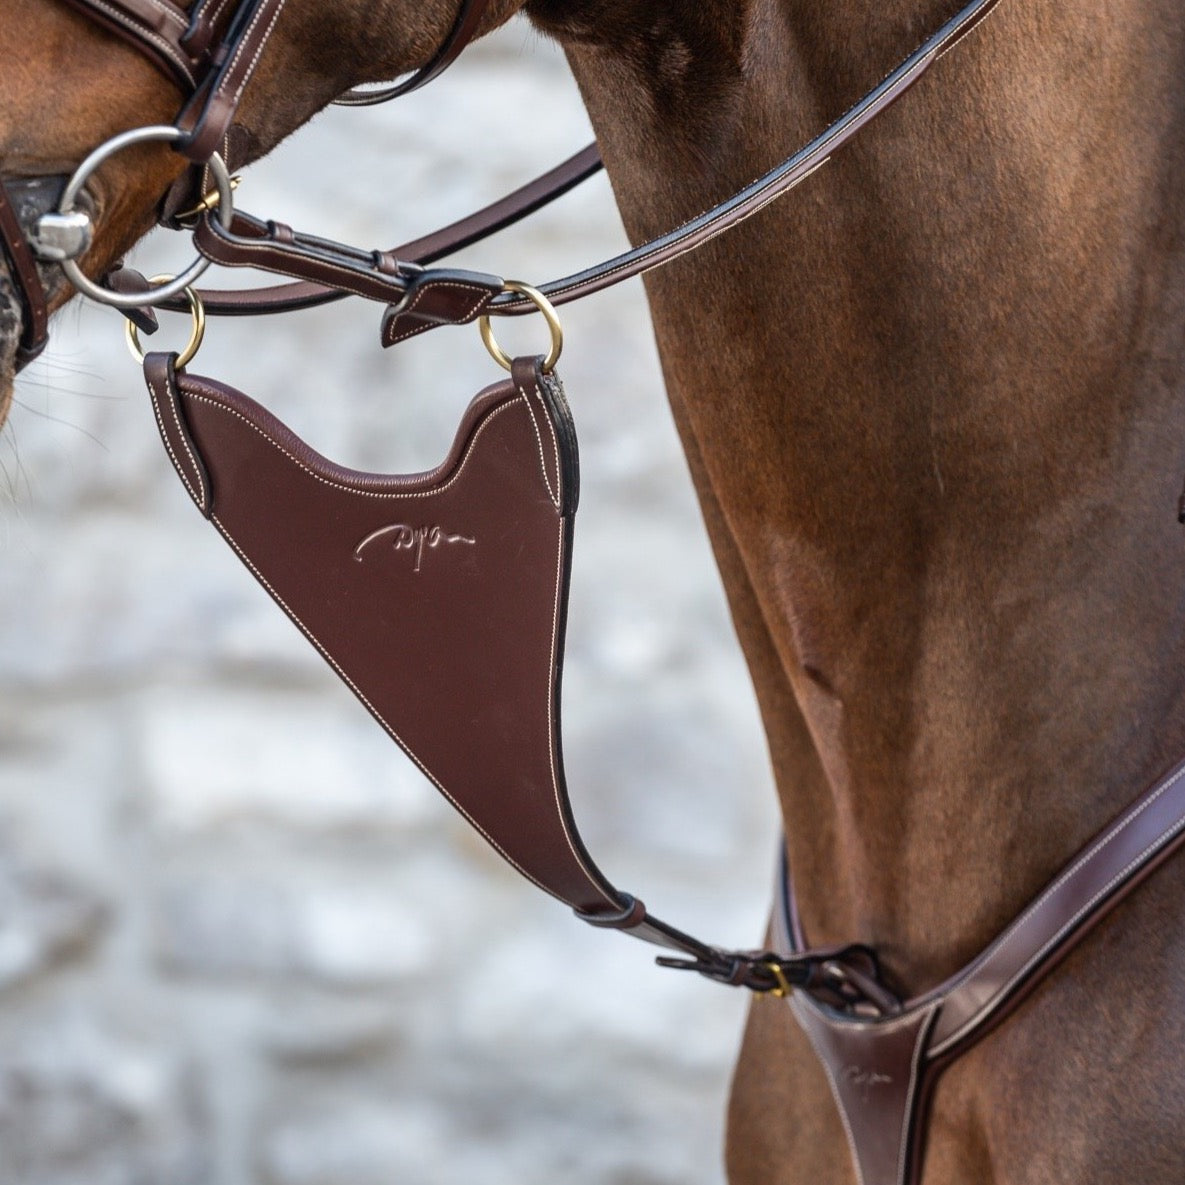 product shot image of the D Collection Hard Bib Martingale Attachment